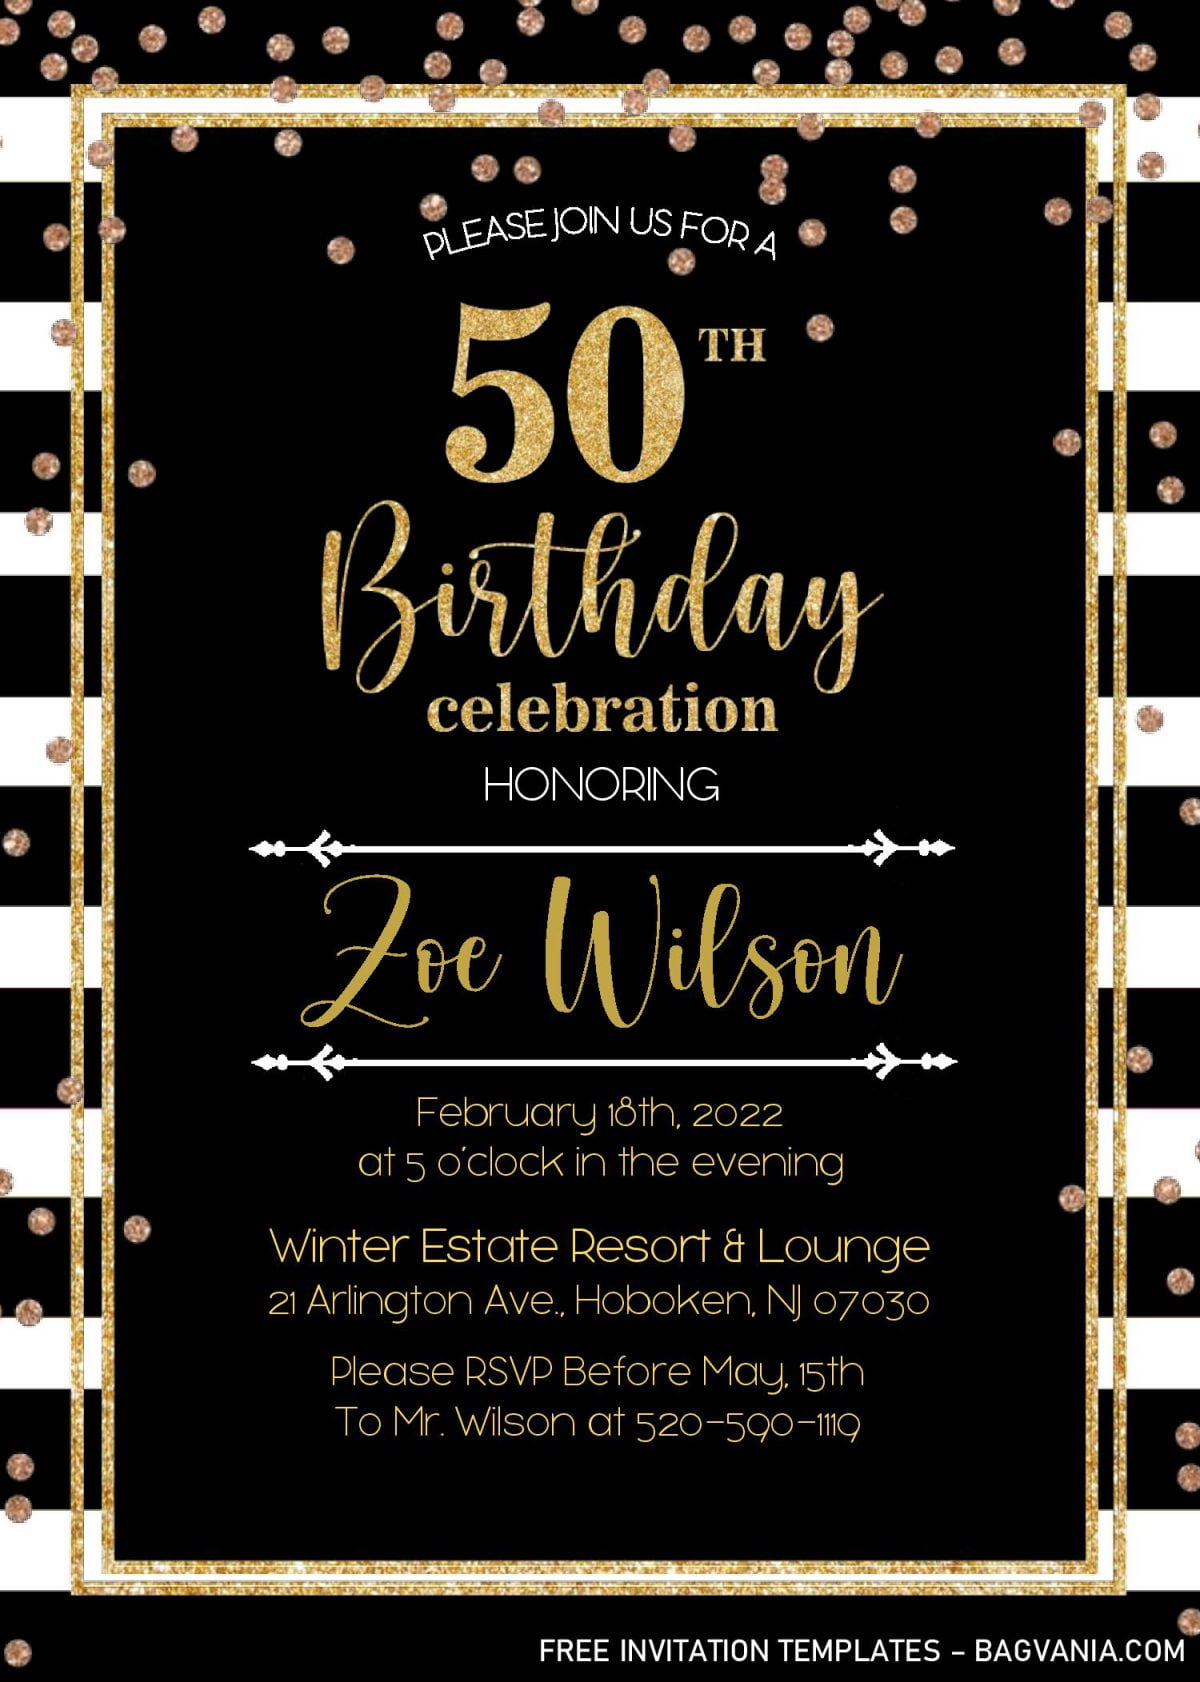 Black And Gold 50th Birthday Invitation Templates - Editable With MS Word and has Aesthetic Fonts